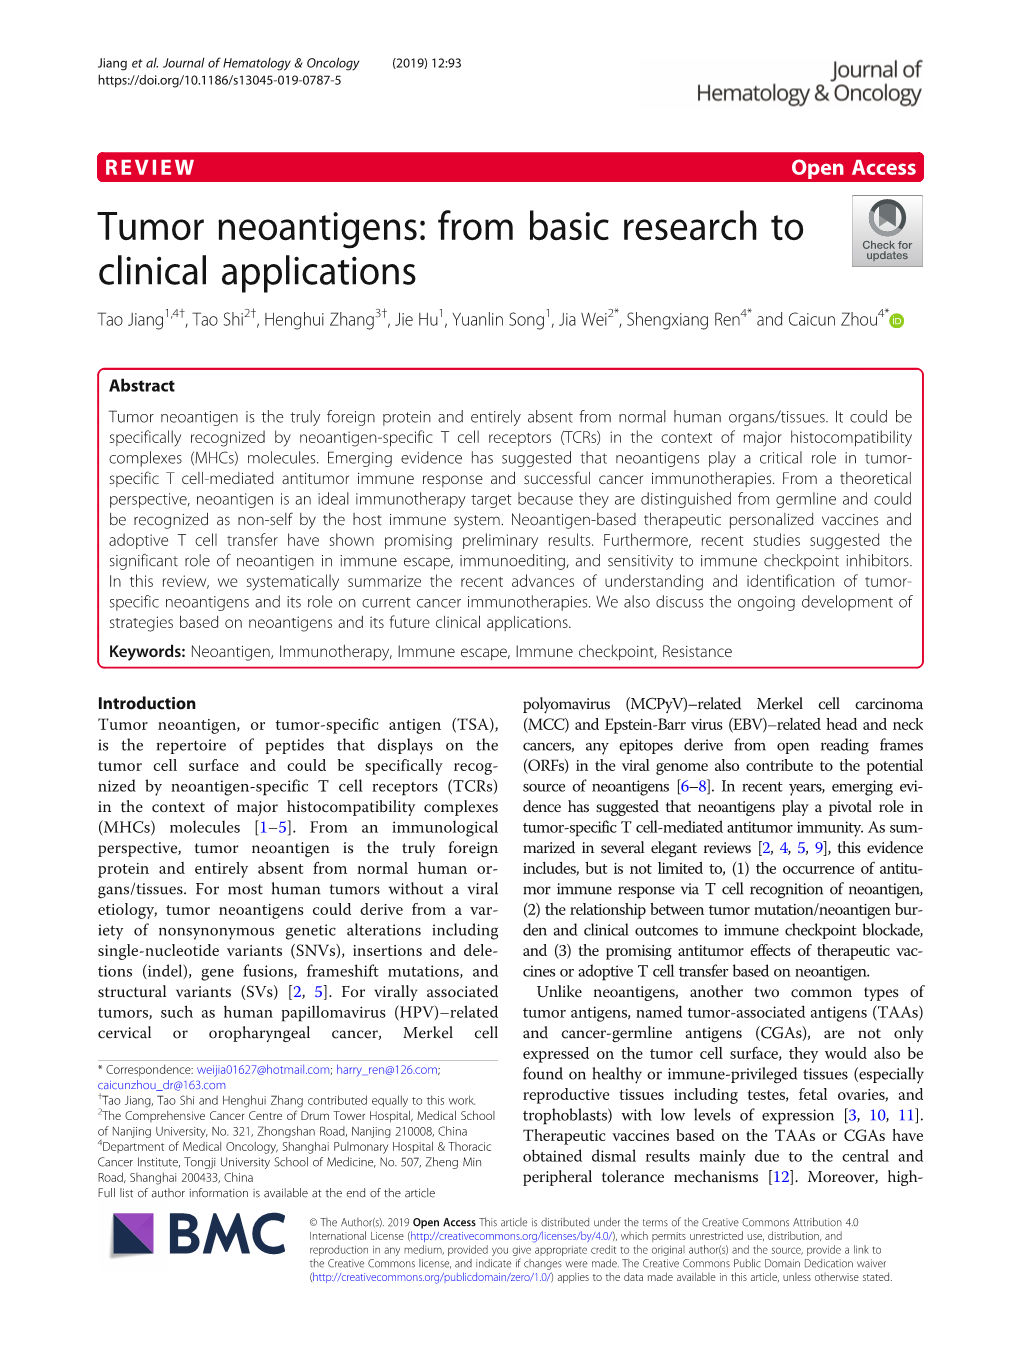 Tumor Neoantigens: from Basic Research to Clinical Applications - DocsLib